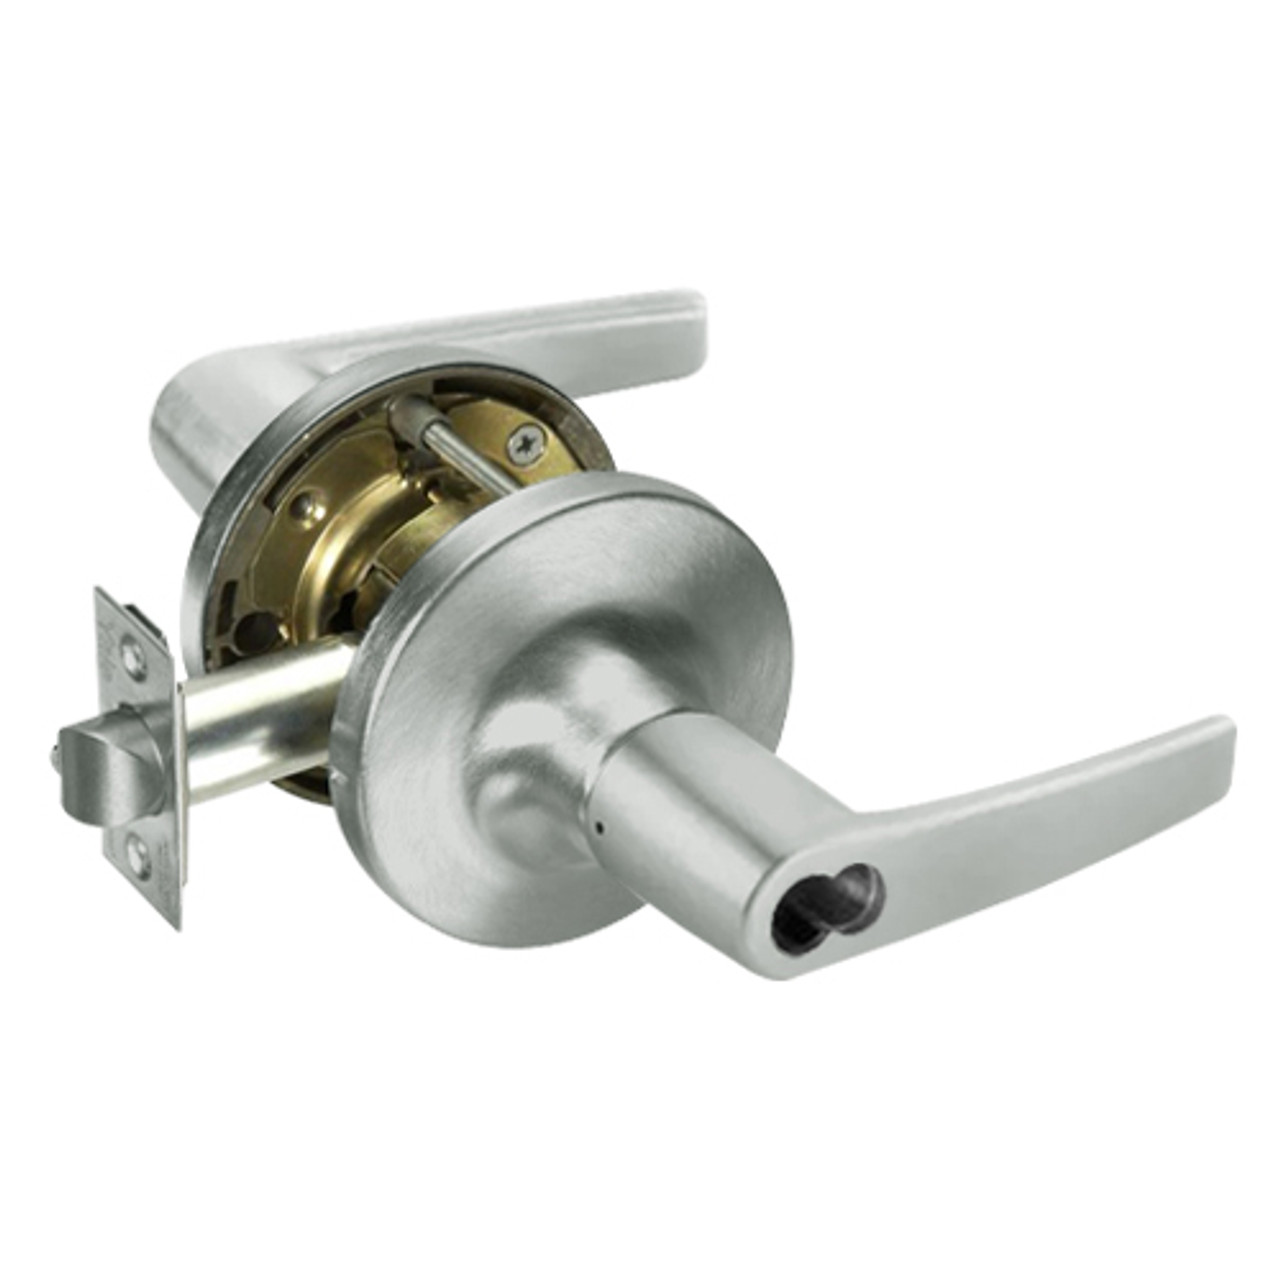 SI-MO5407LN-619 Yale 5400LN Series Single Cylinder Entry Cylindrical Locks with Monroe Lever Prepped for Schlage IC Core in Satin Nickel